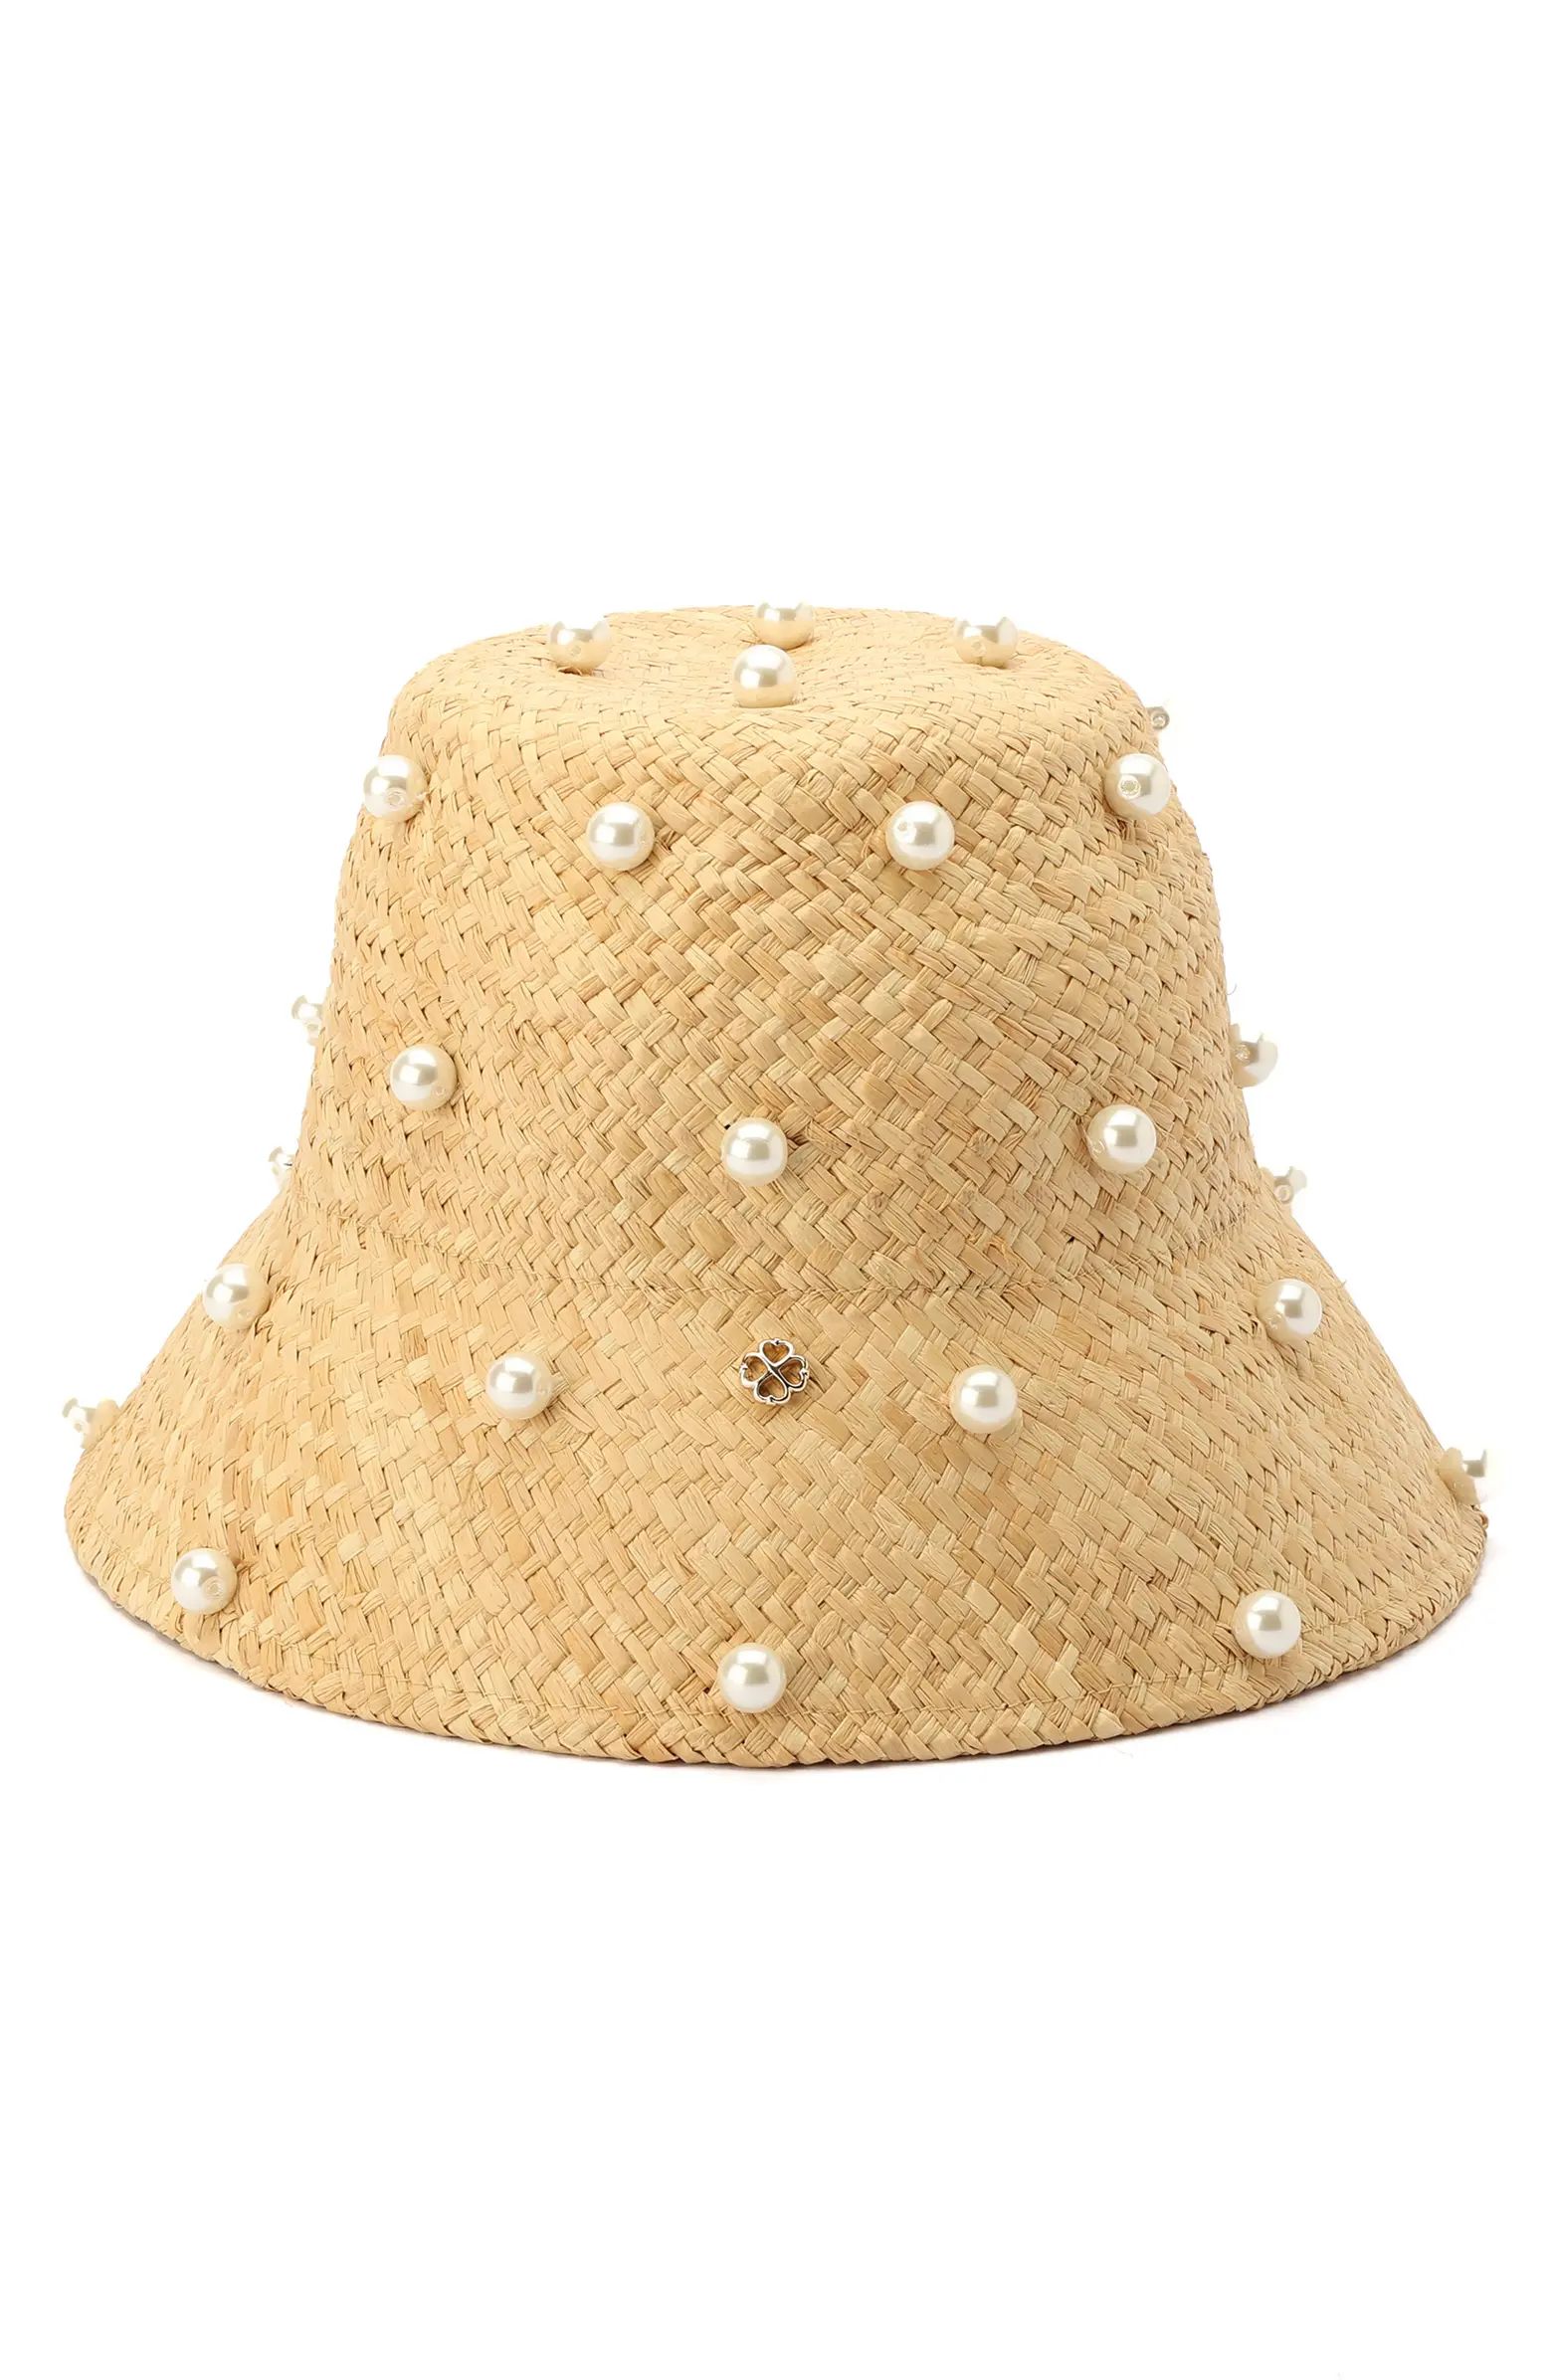 pearl embellished straw cloche | Nordstrom